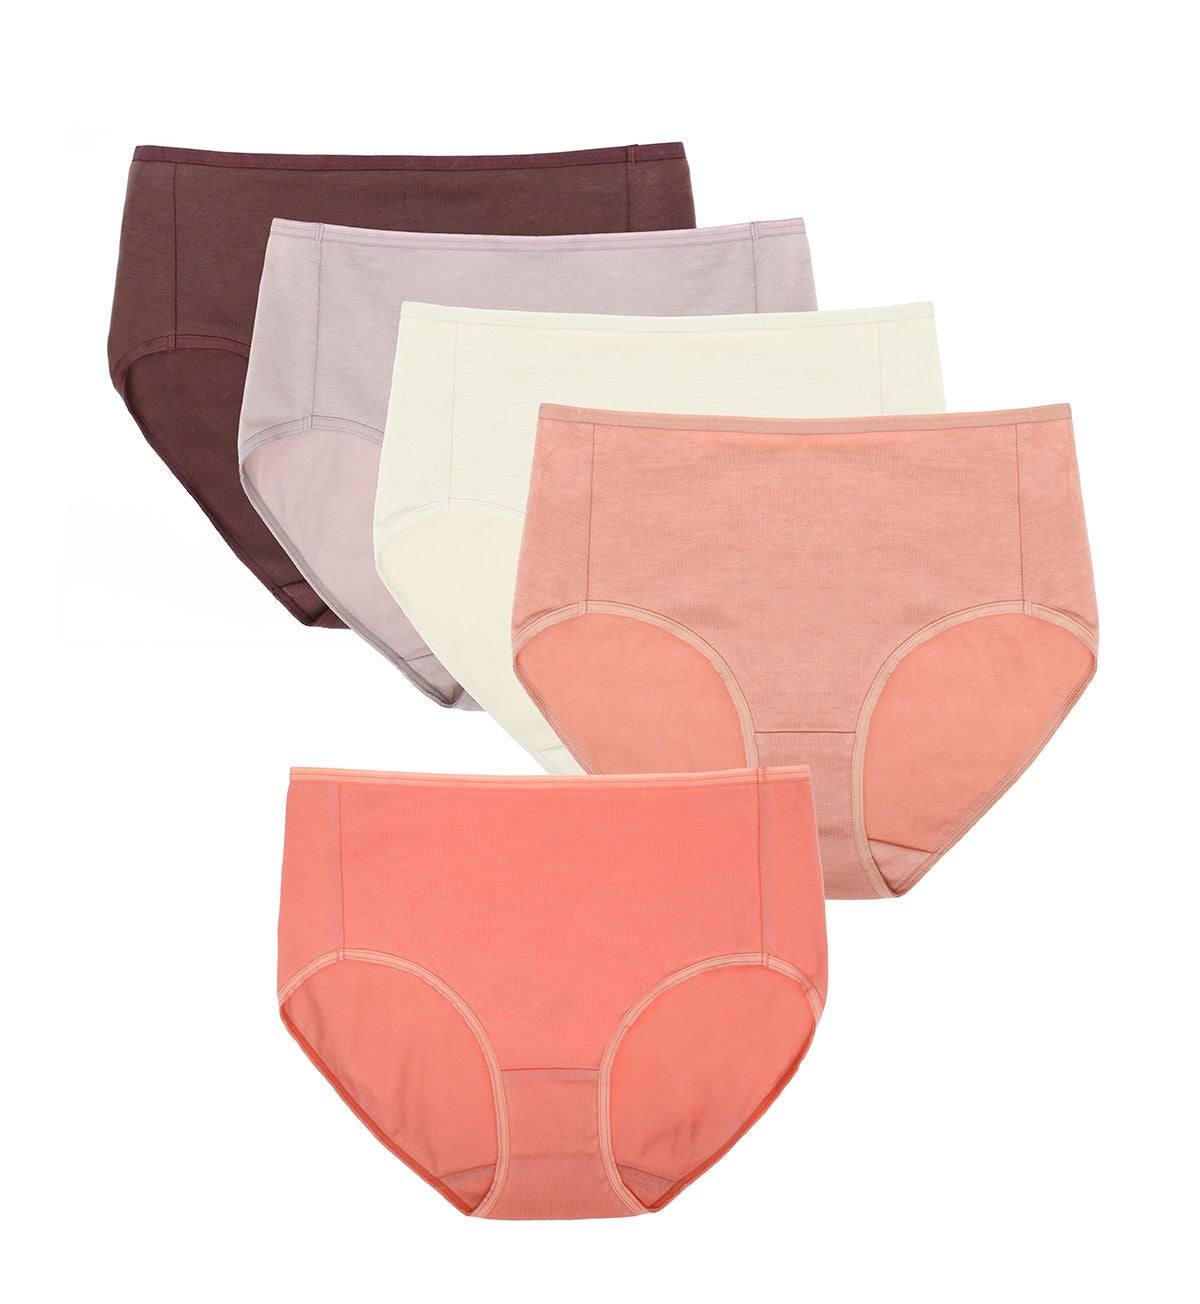 Maxi Panties - High Waisted Full Coverage Briefs